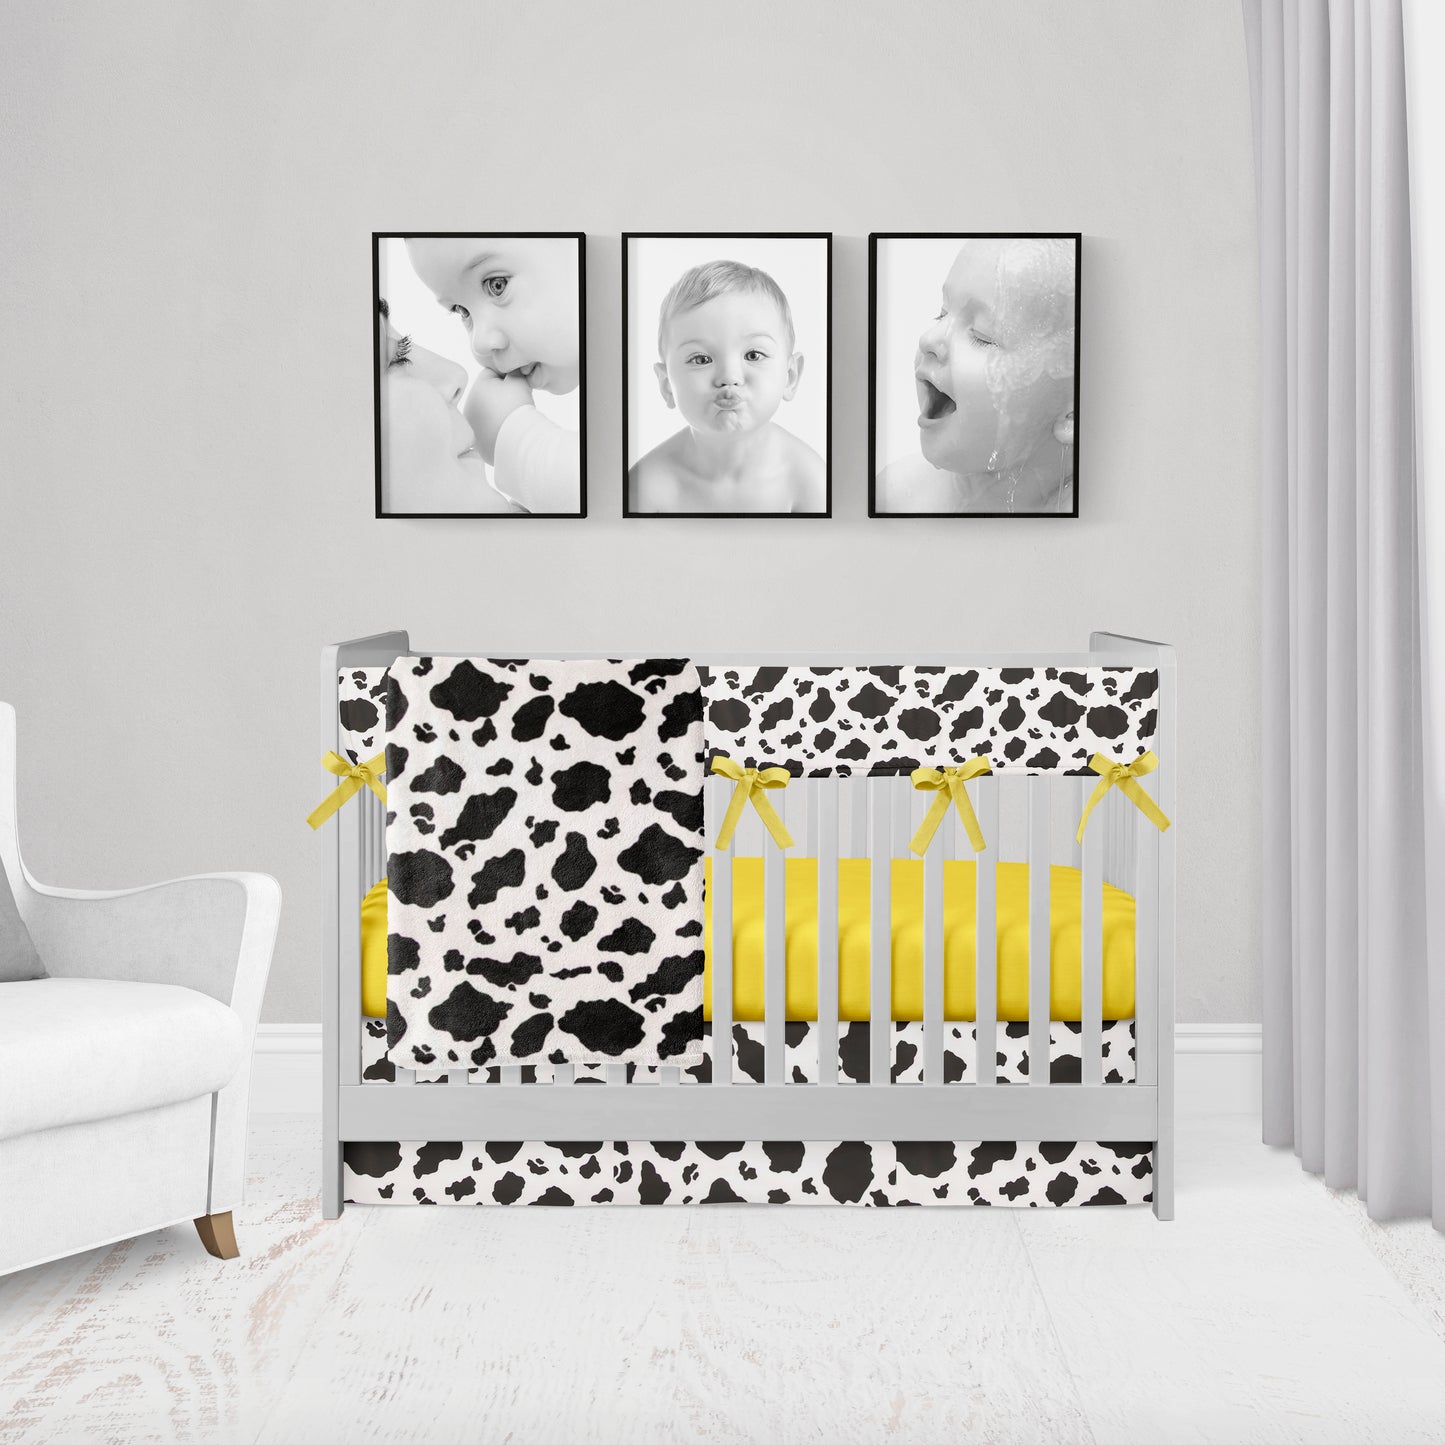 4-5 piece sets - black and white cow print blanket, available in cotton/minky and double minky, rail cover with yellow ties, yellow crib sheet & cow crib skirt